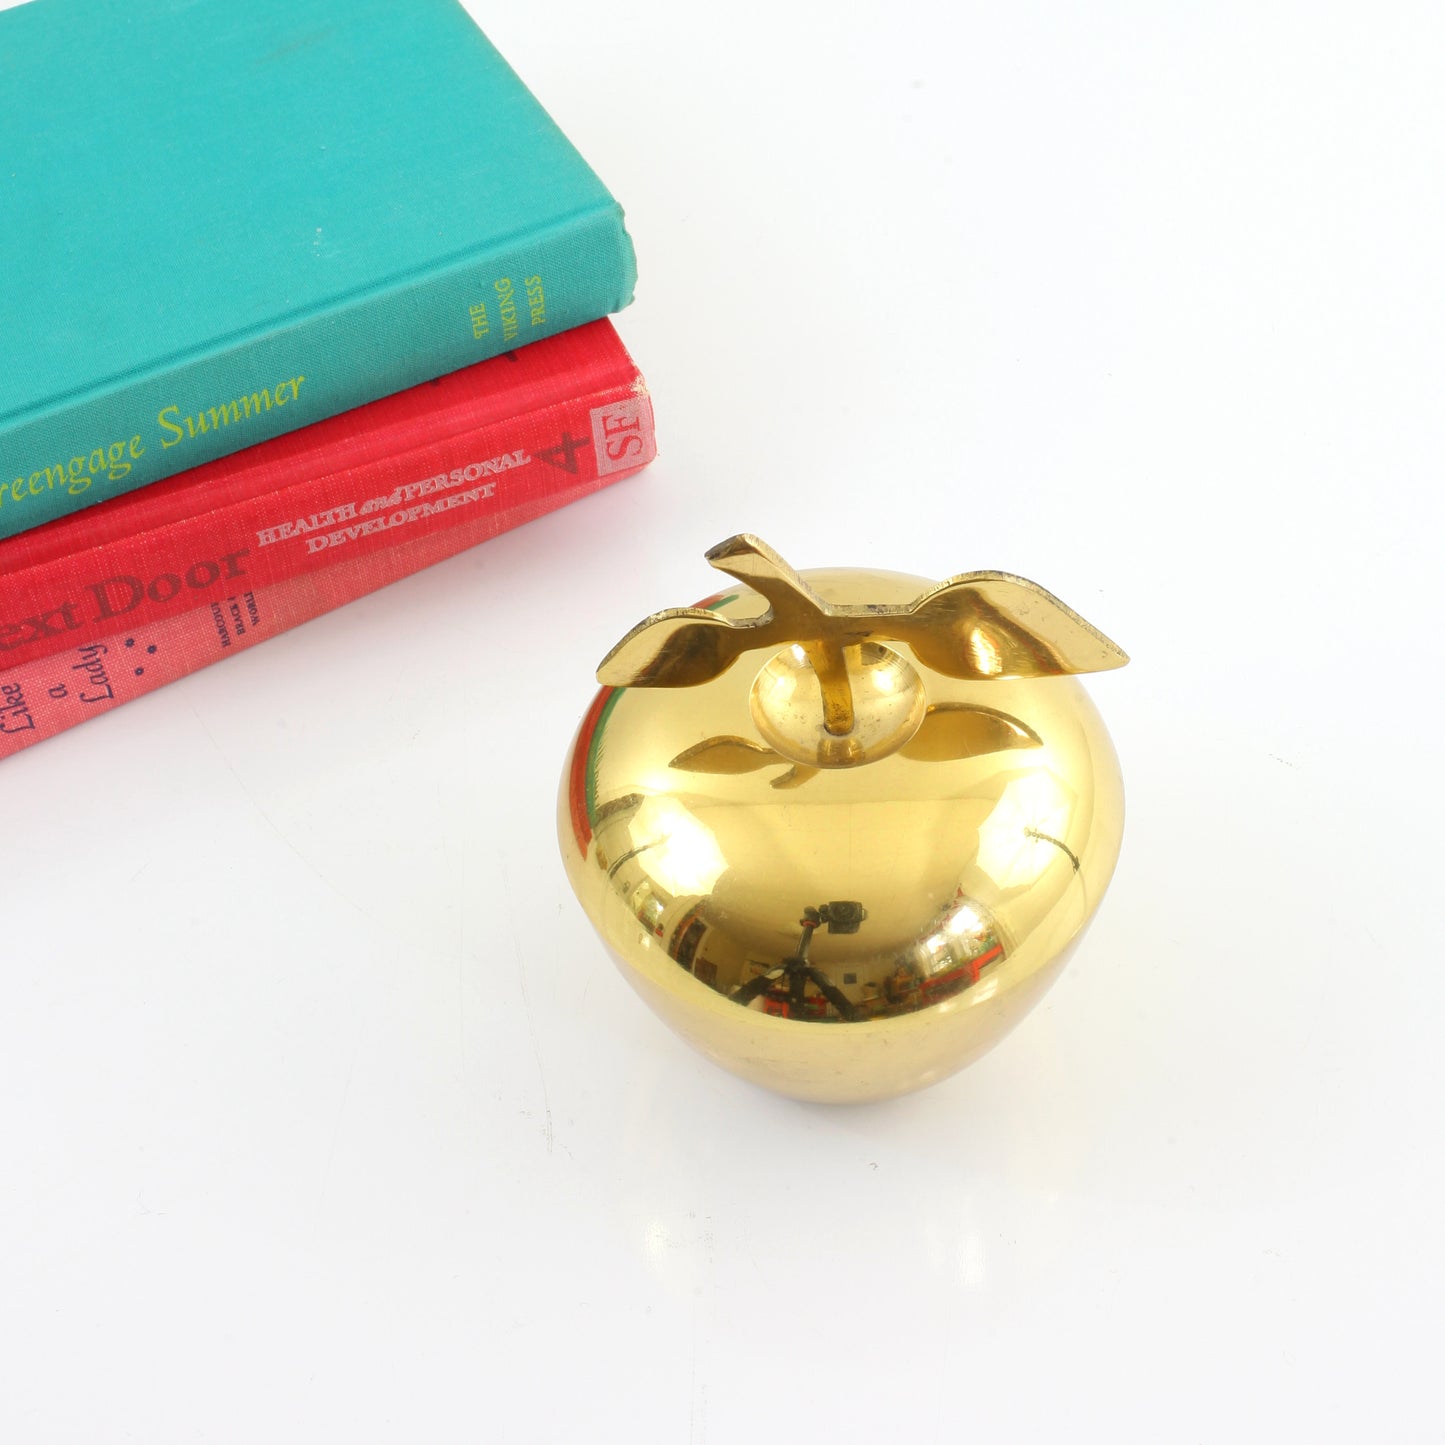 SOLD - Vintage Brass Apple Container